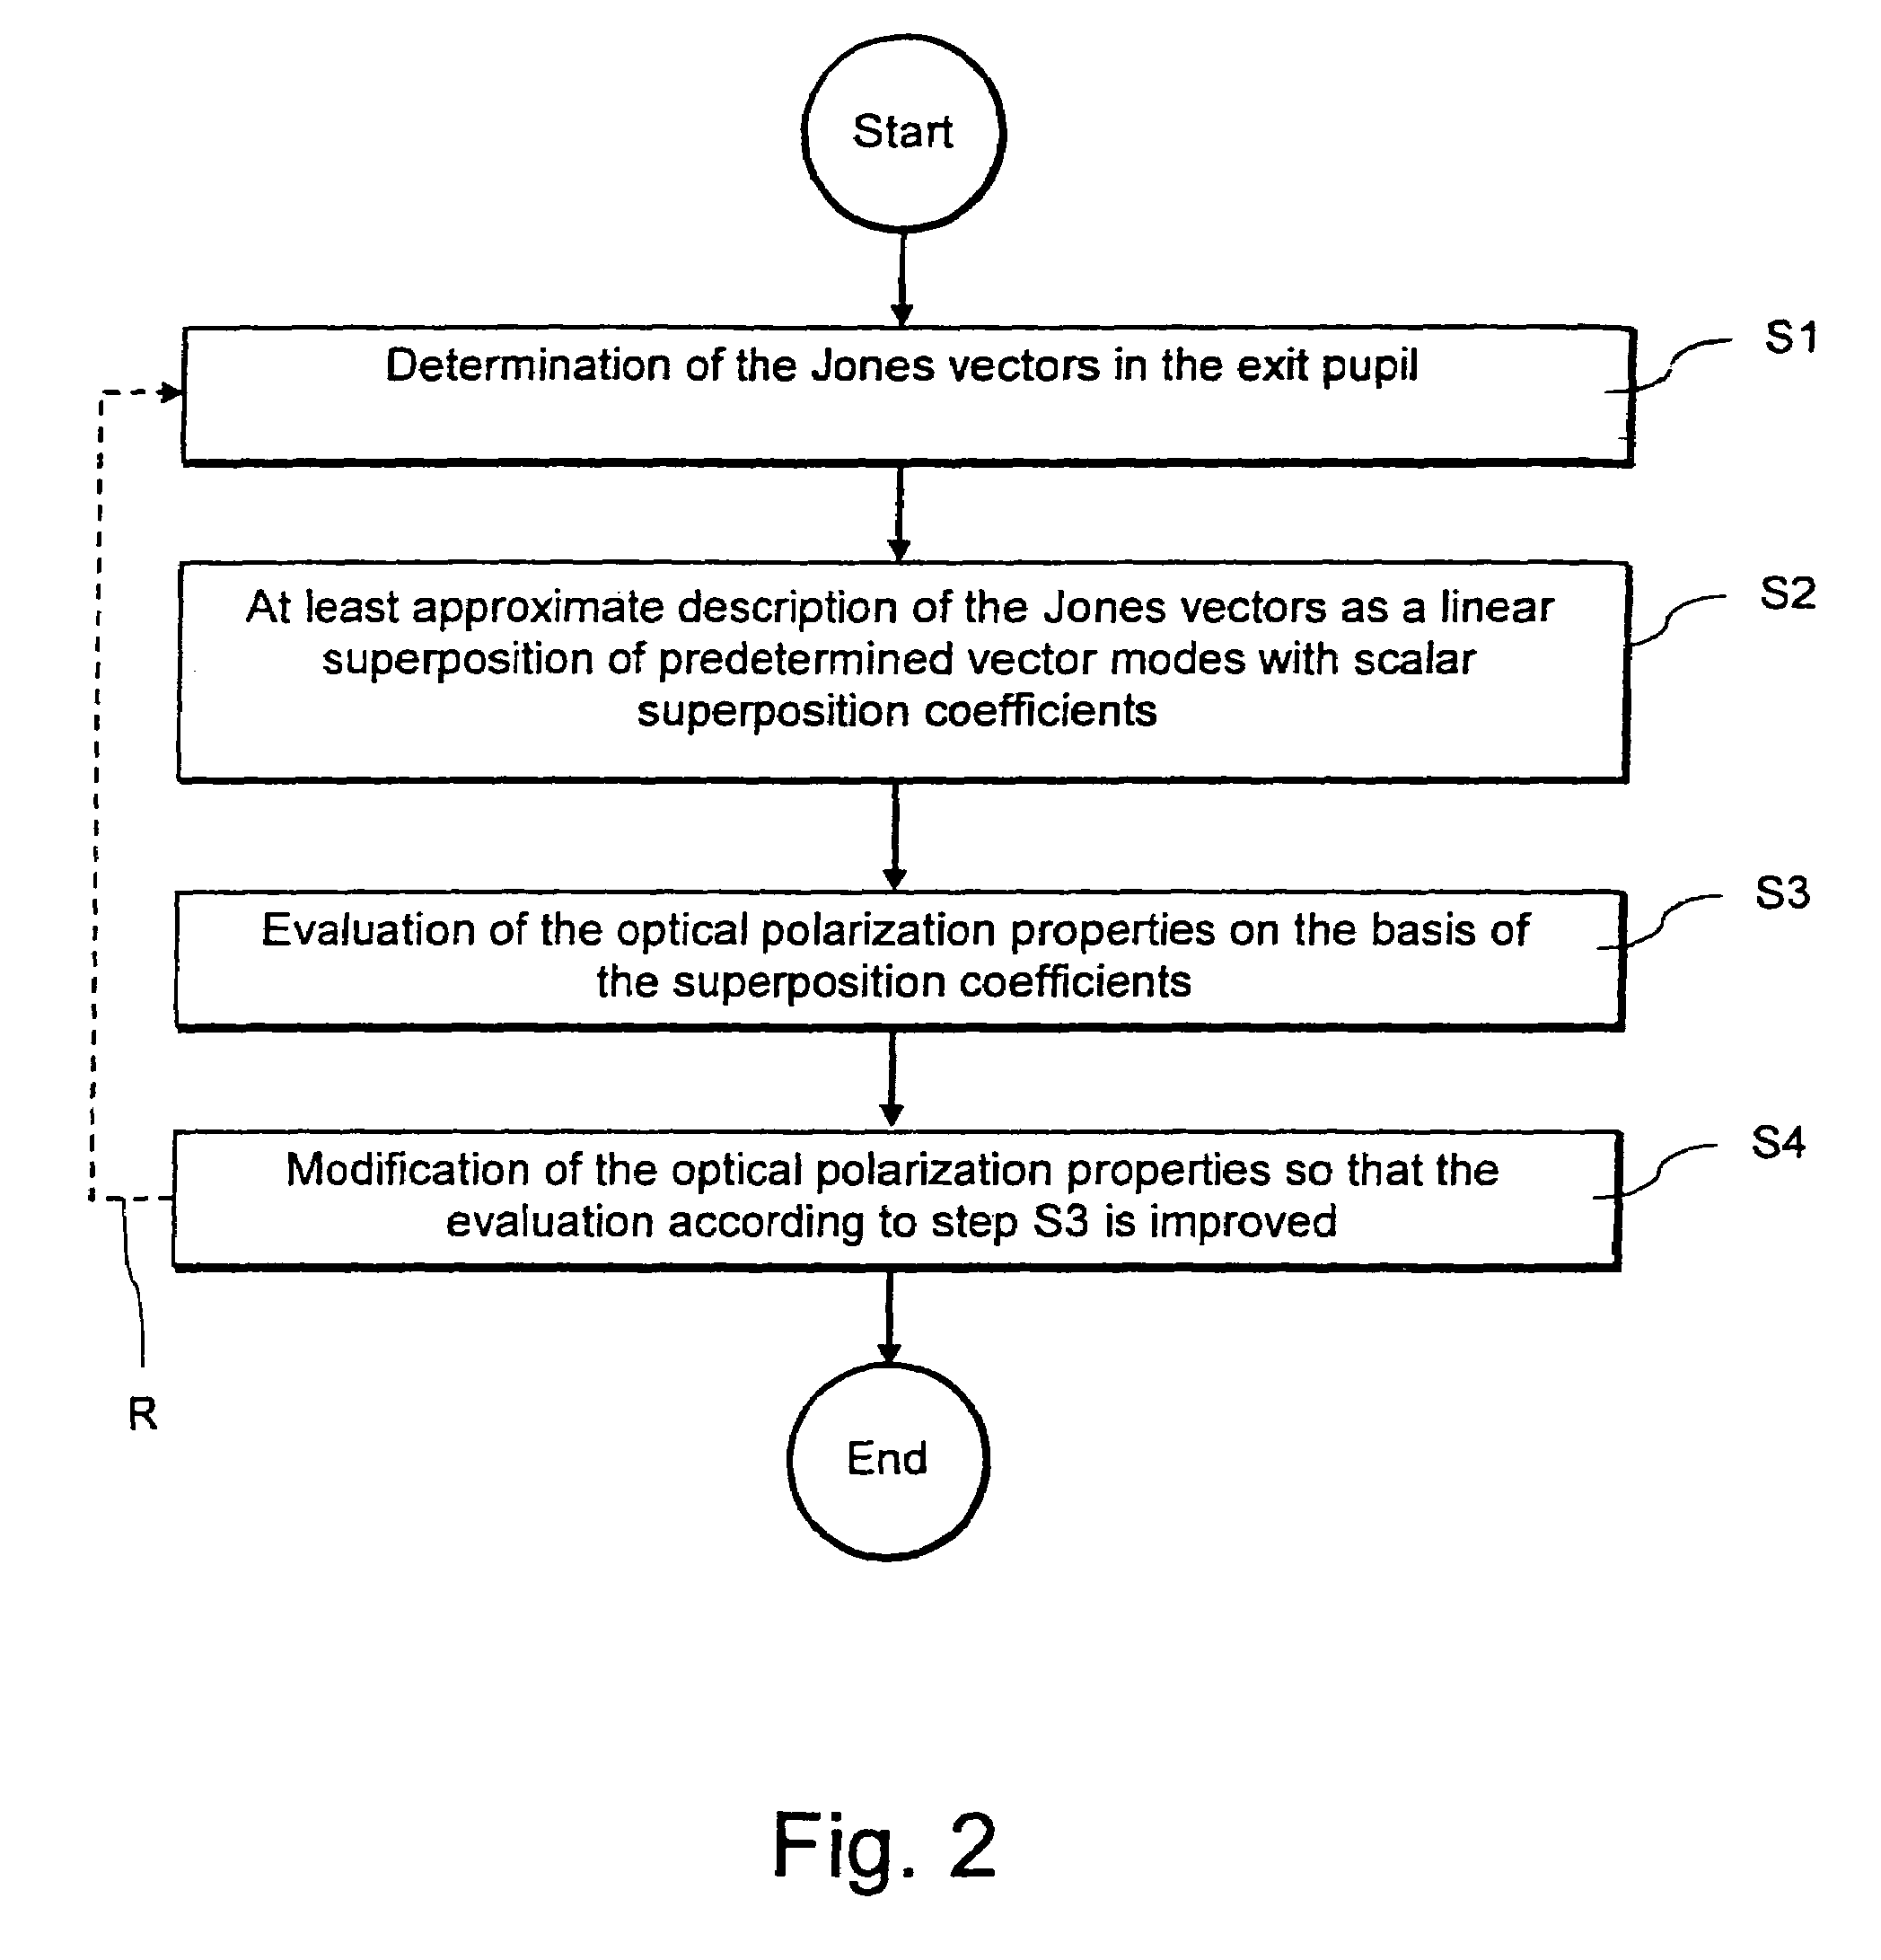 Method for describing, evaluating and improving optical polarization properties of a microlithographic projection exposure apparatus